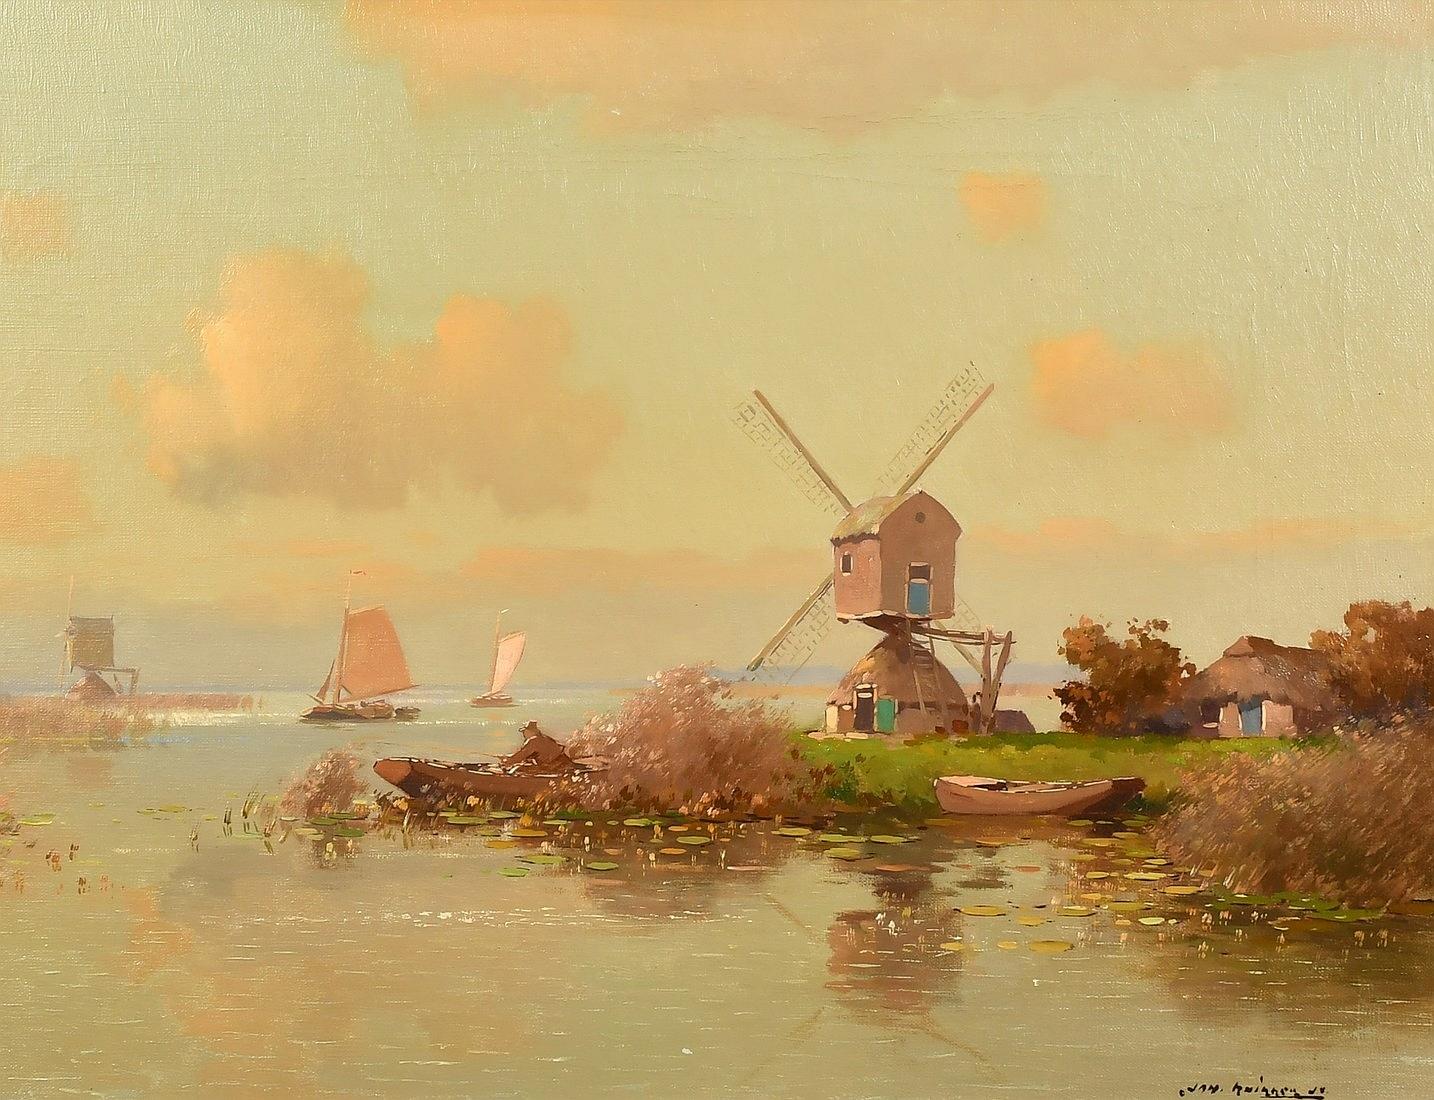 A beautiful c.1930 Dutch oil on canvas river landscape with boats and windmill by Jan Knikker Jr. The work is signed lower right and presented in a swept gilt frame. A lovely typically Dutch landscape in excellent original condition.

Artist: Jan